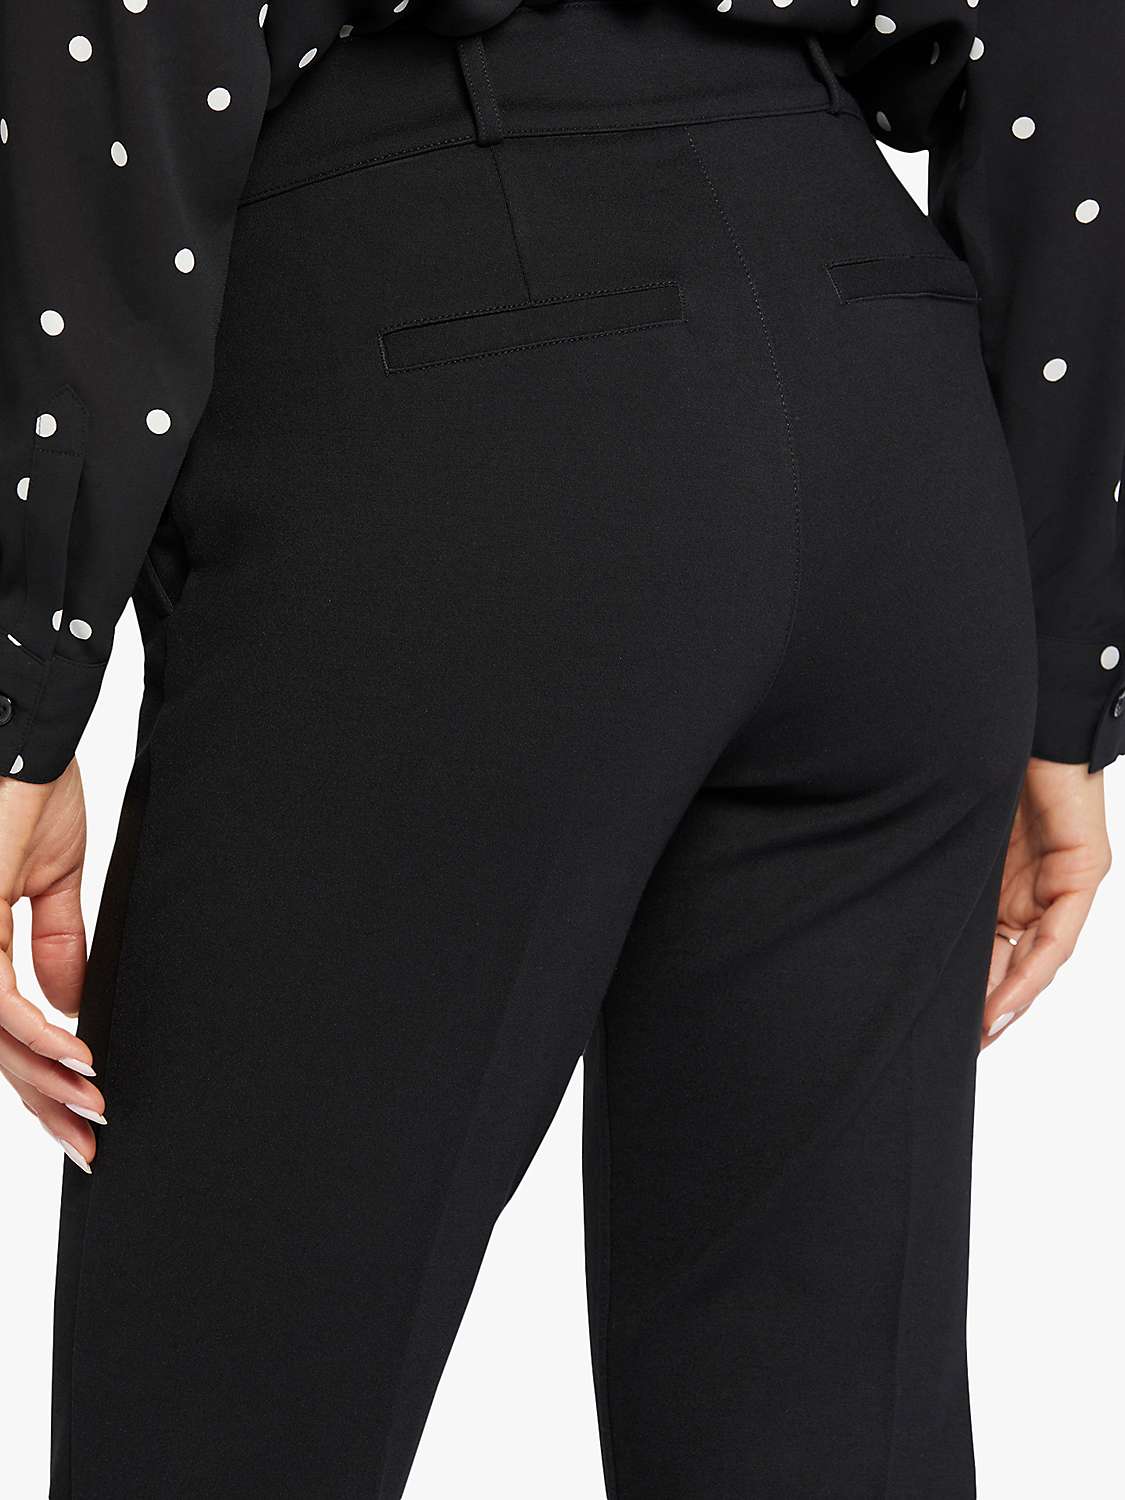 Buy NYDJ Sculpt Her Classic Straight Trousers, Black Online at johnlewis.com